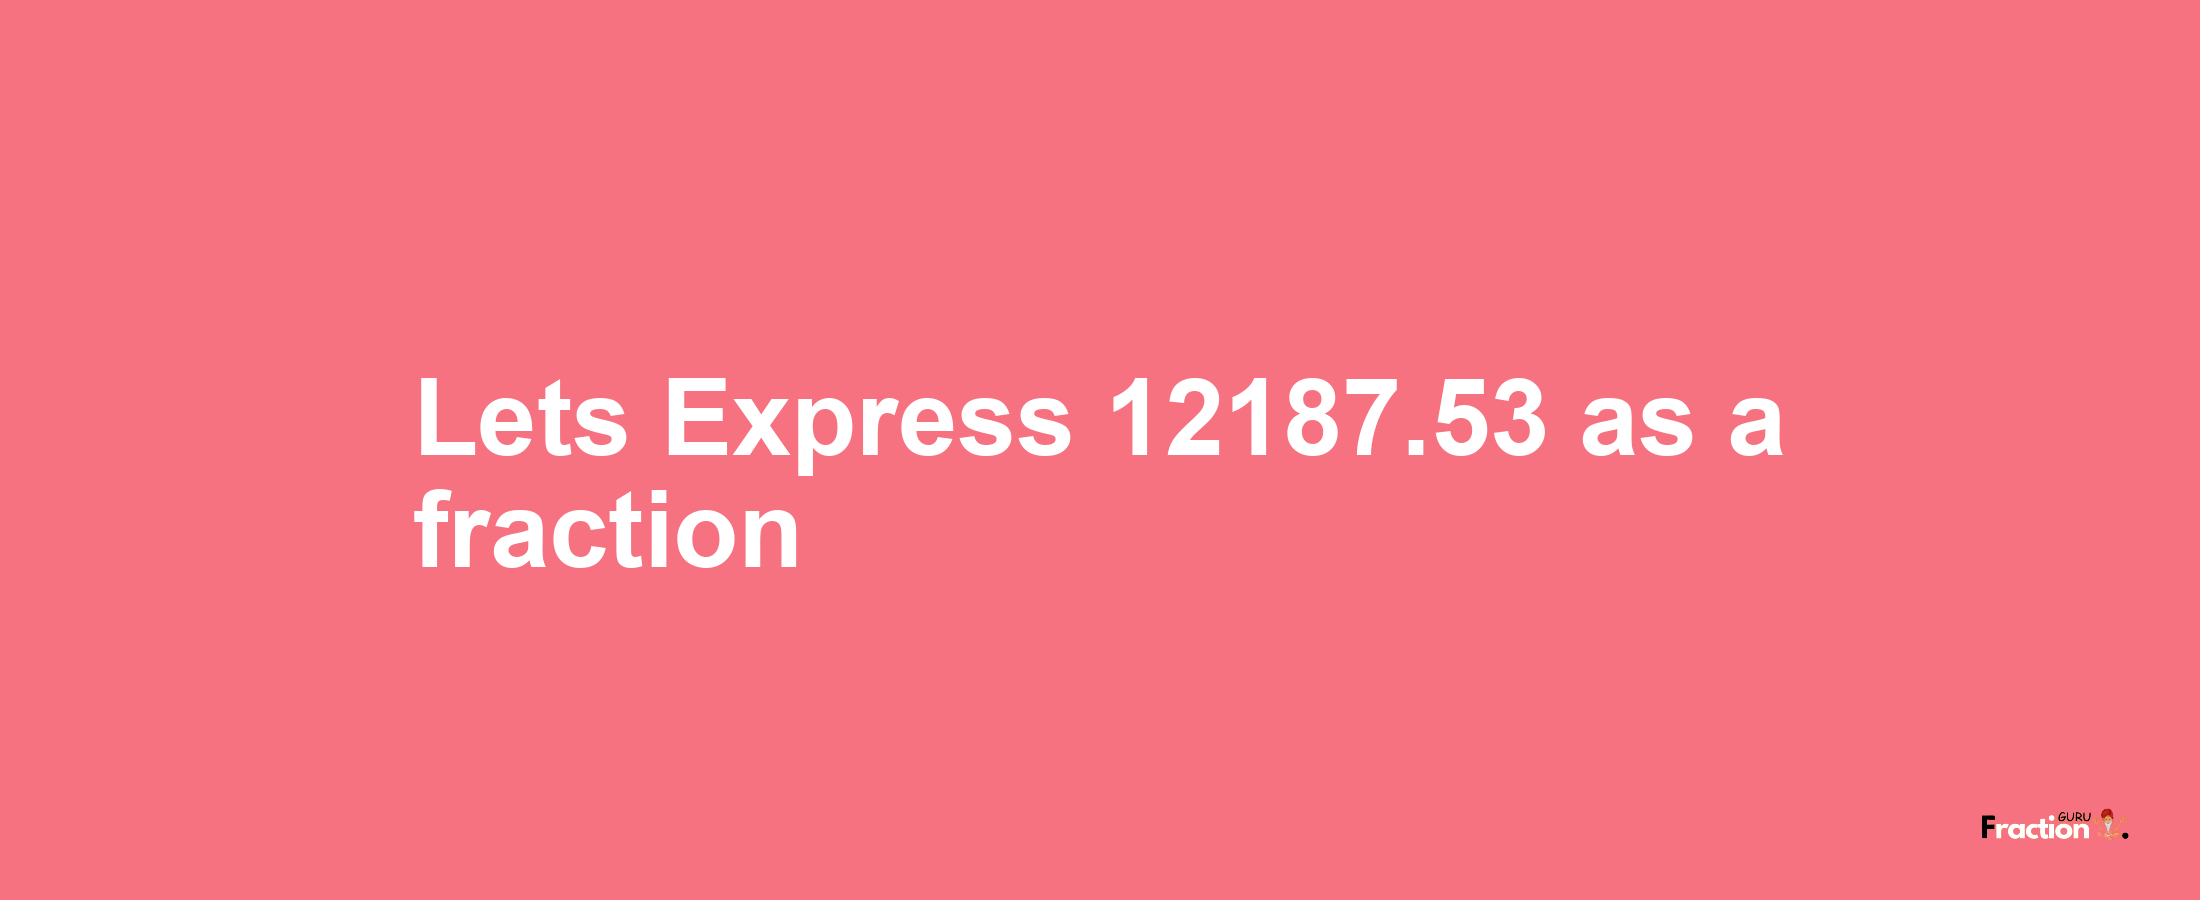 Lets Express 12187.53 as afraction